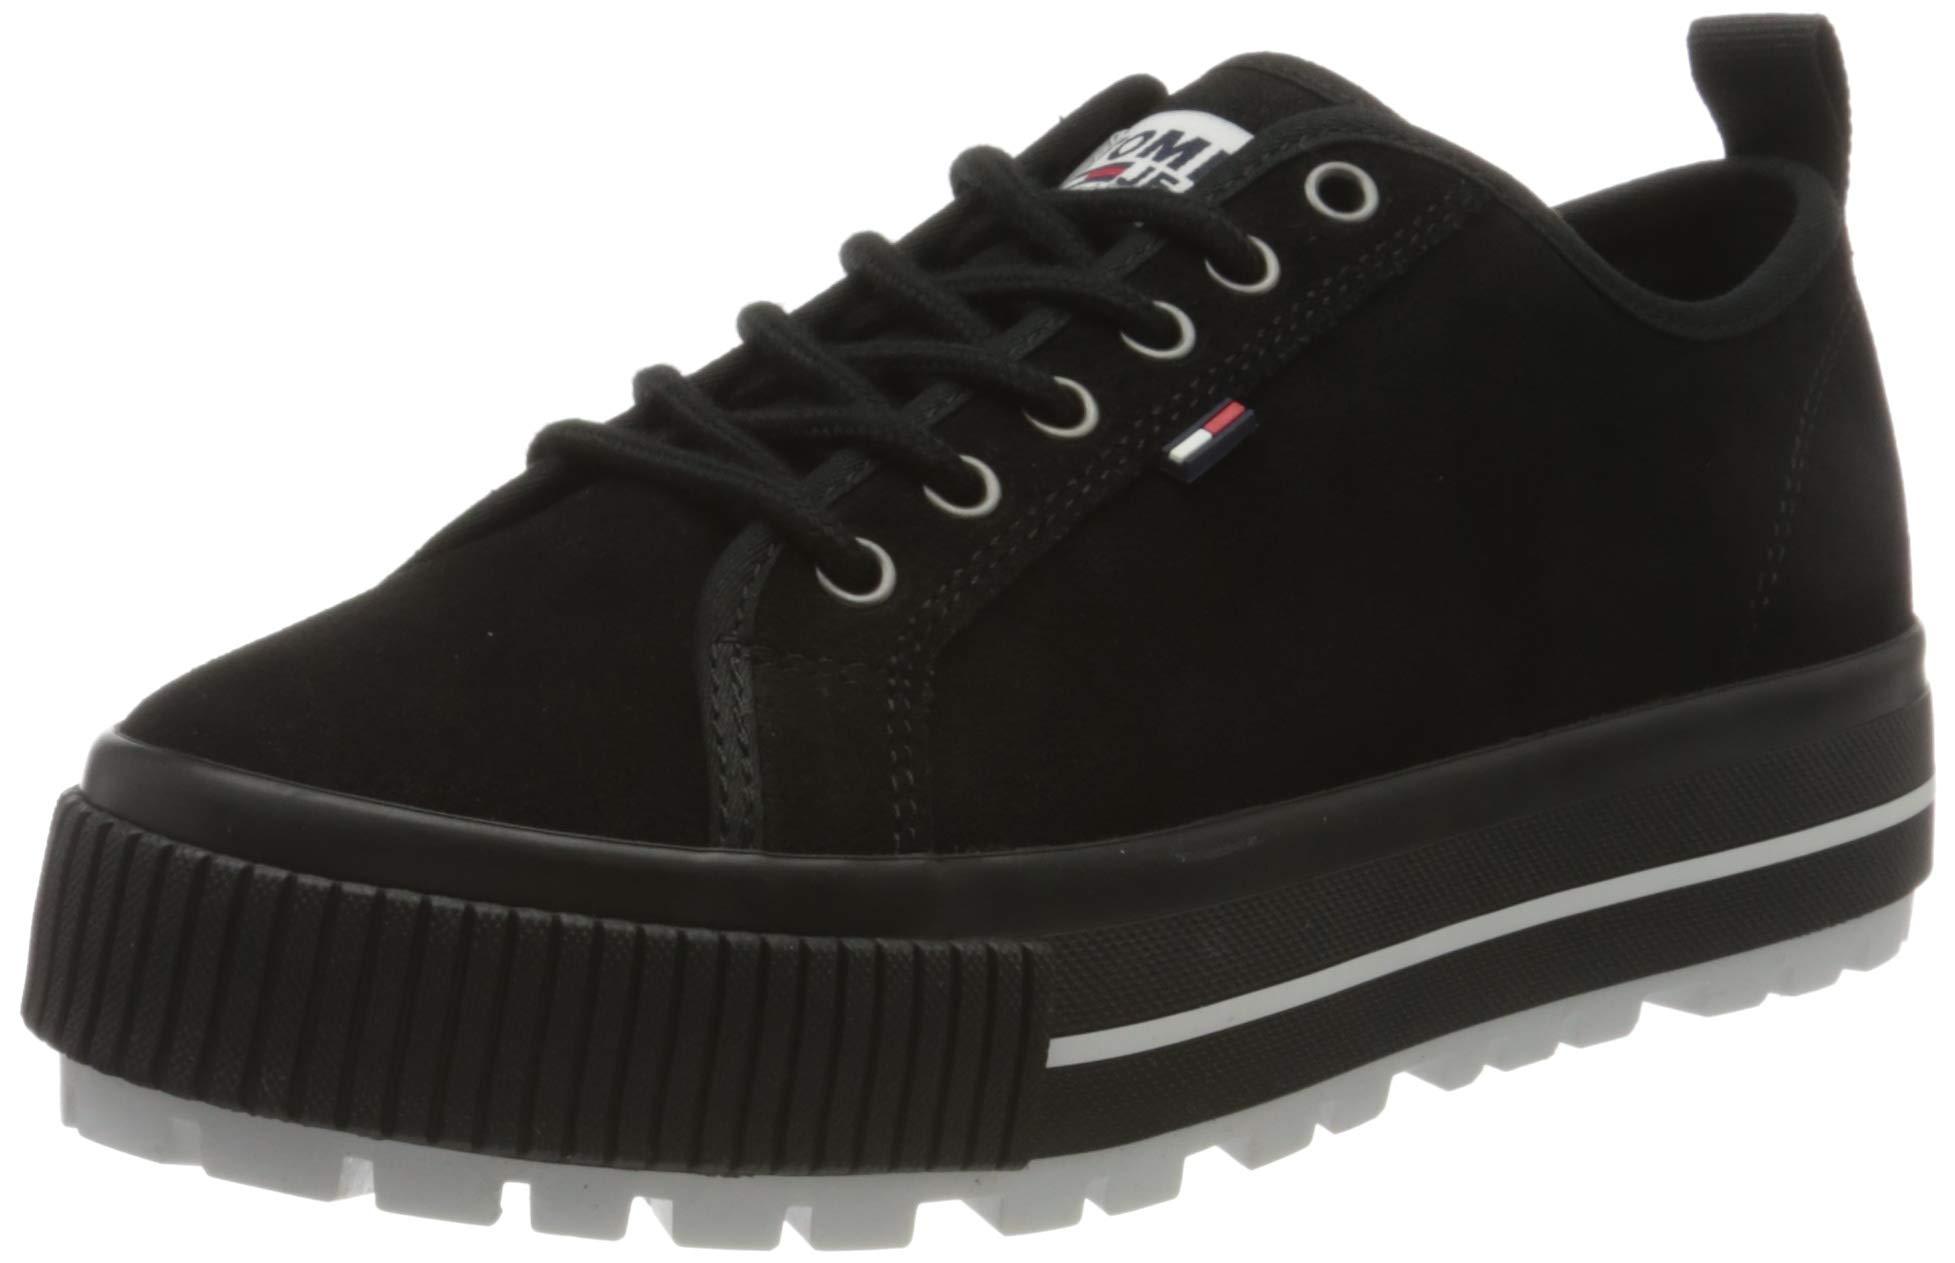 Tommy Hilfiger Paige 4b Trainers in Black - Lyst